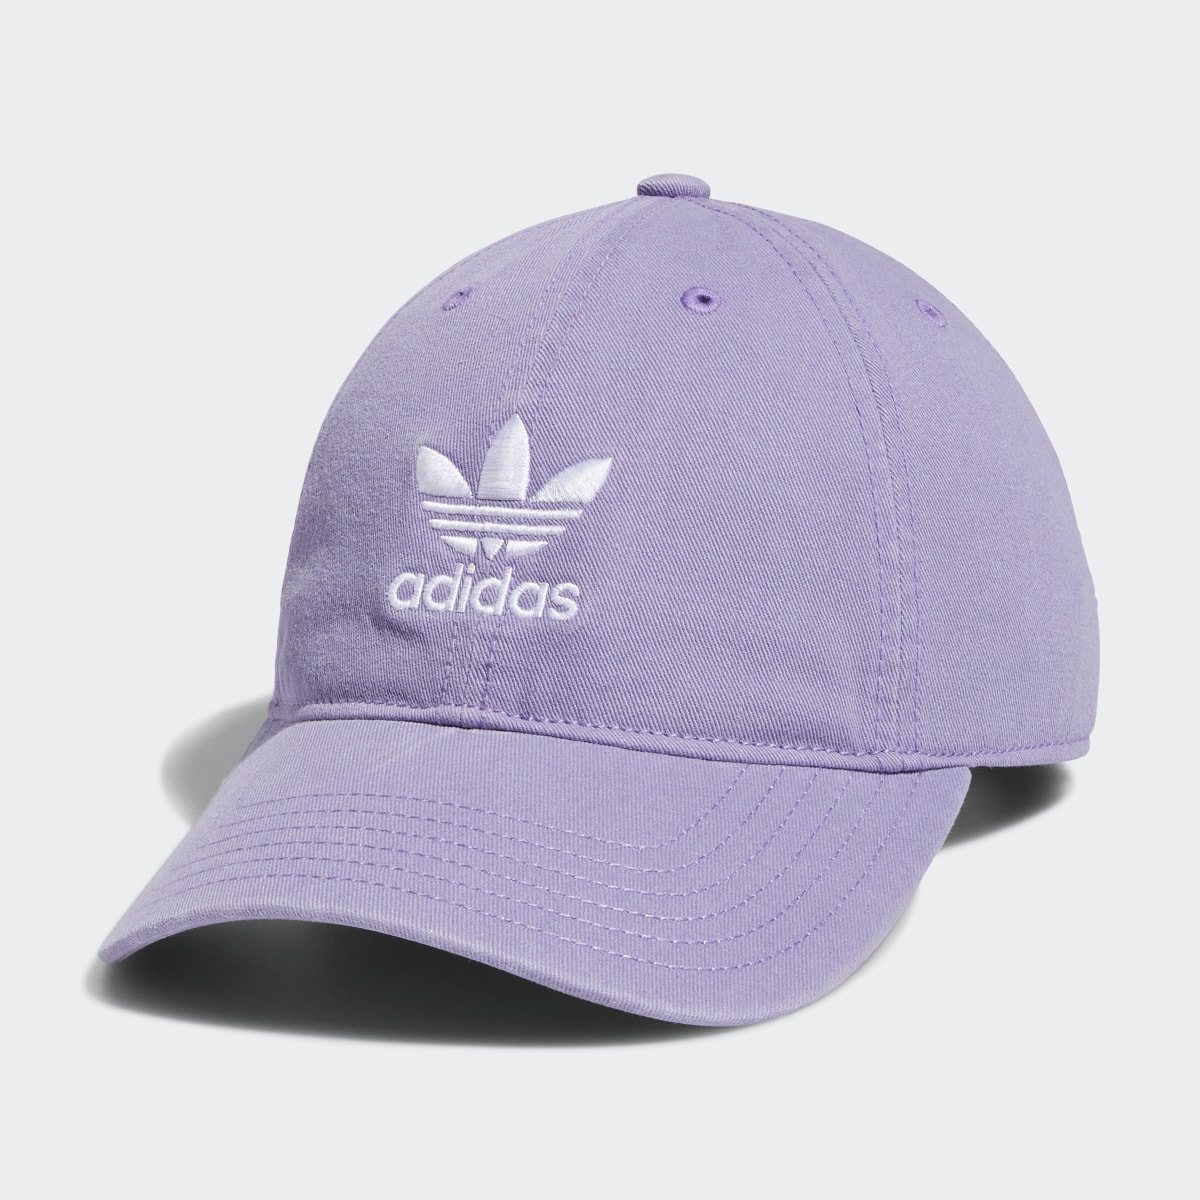 Adidas Relaxed Strap Back Hat. 4